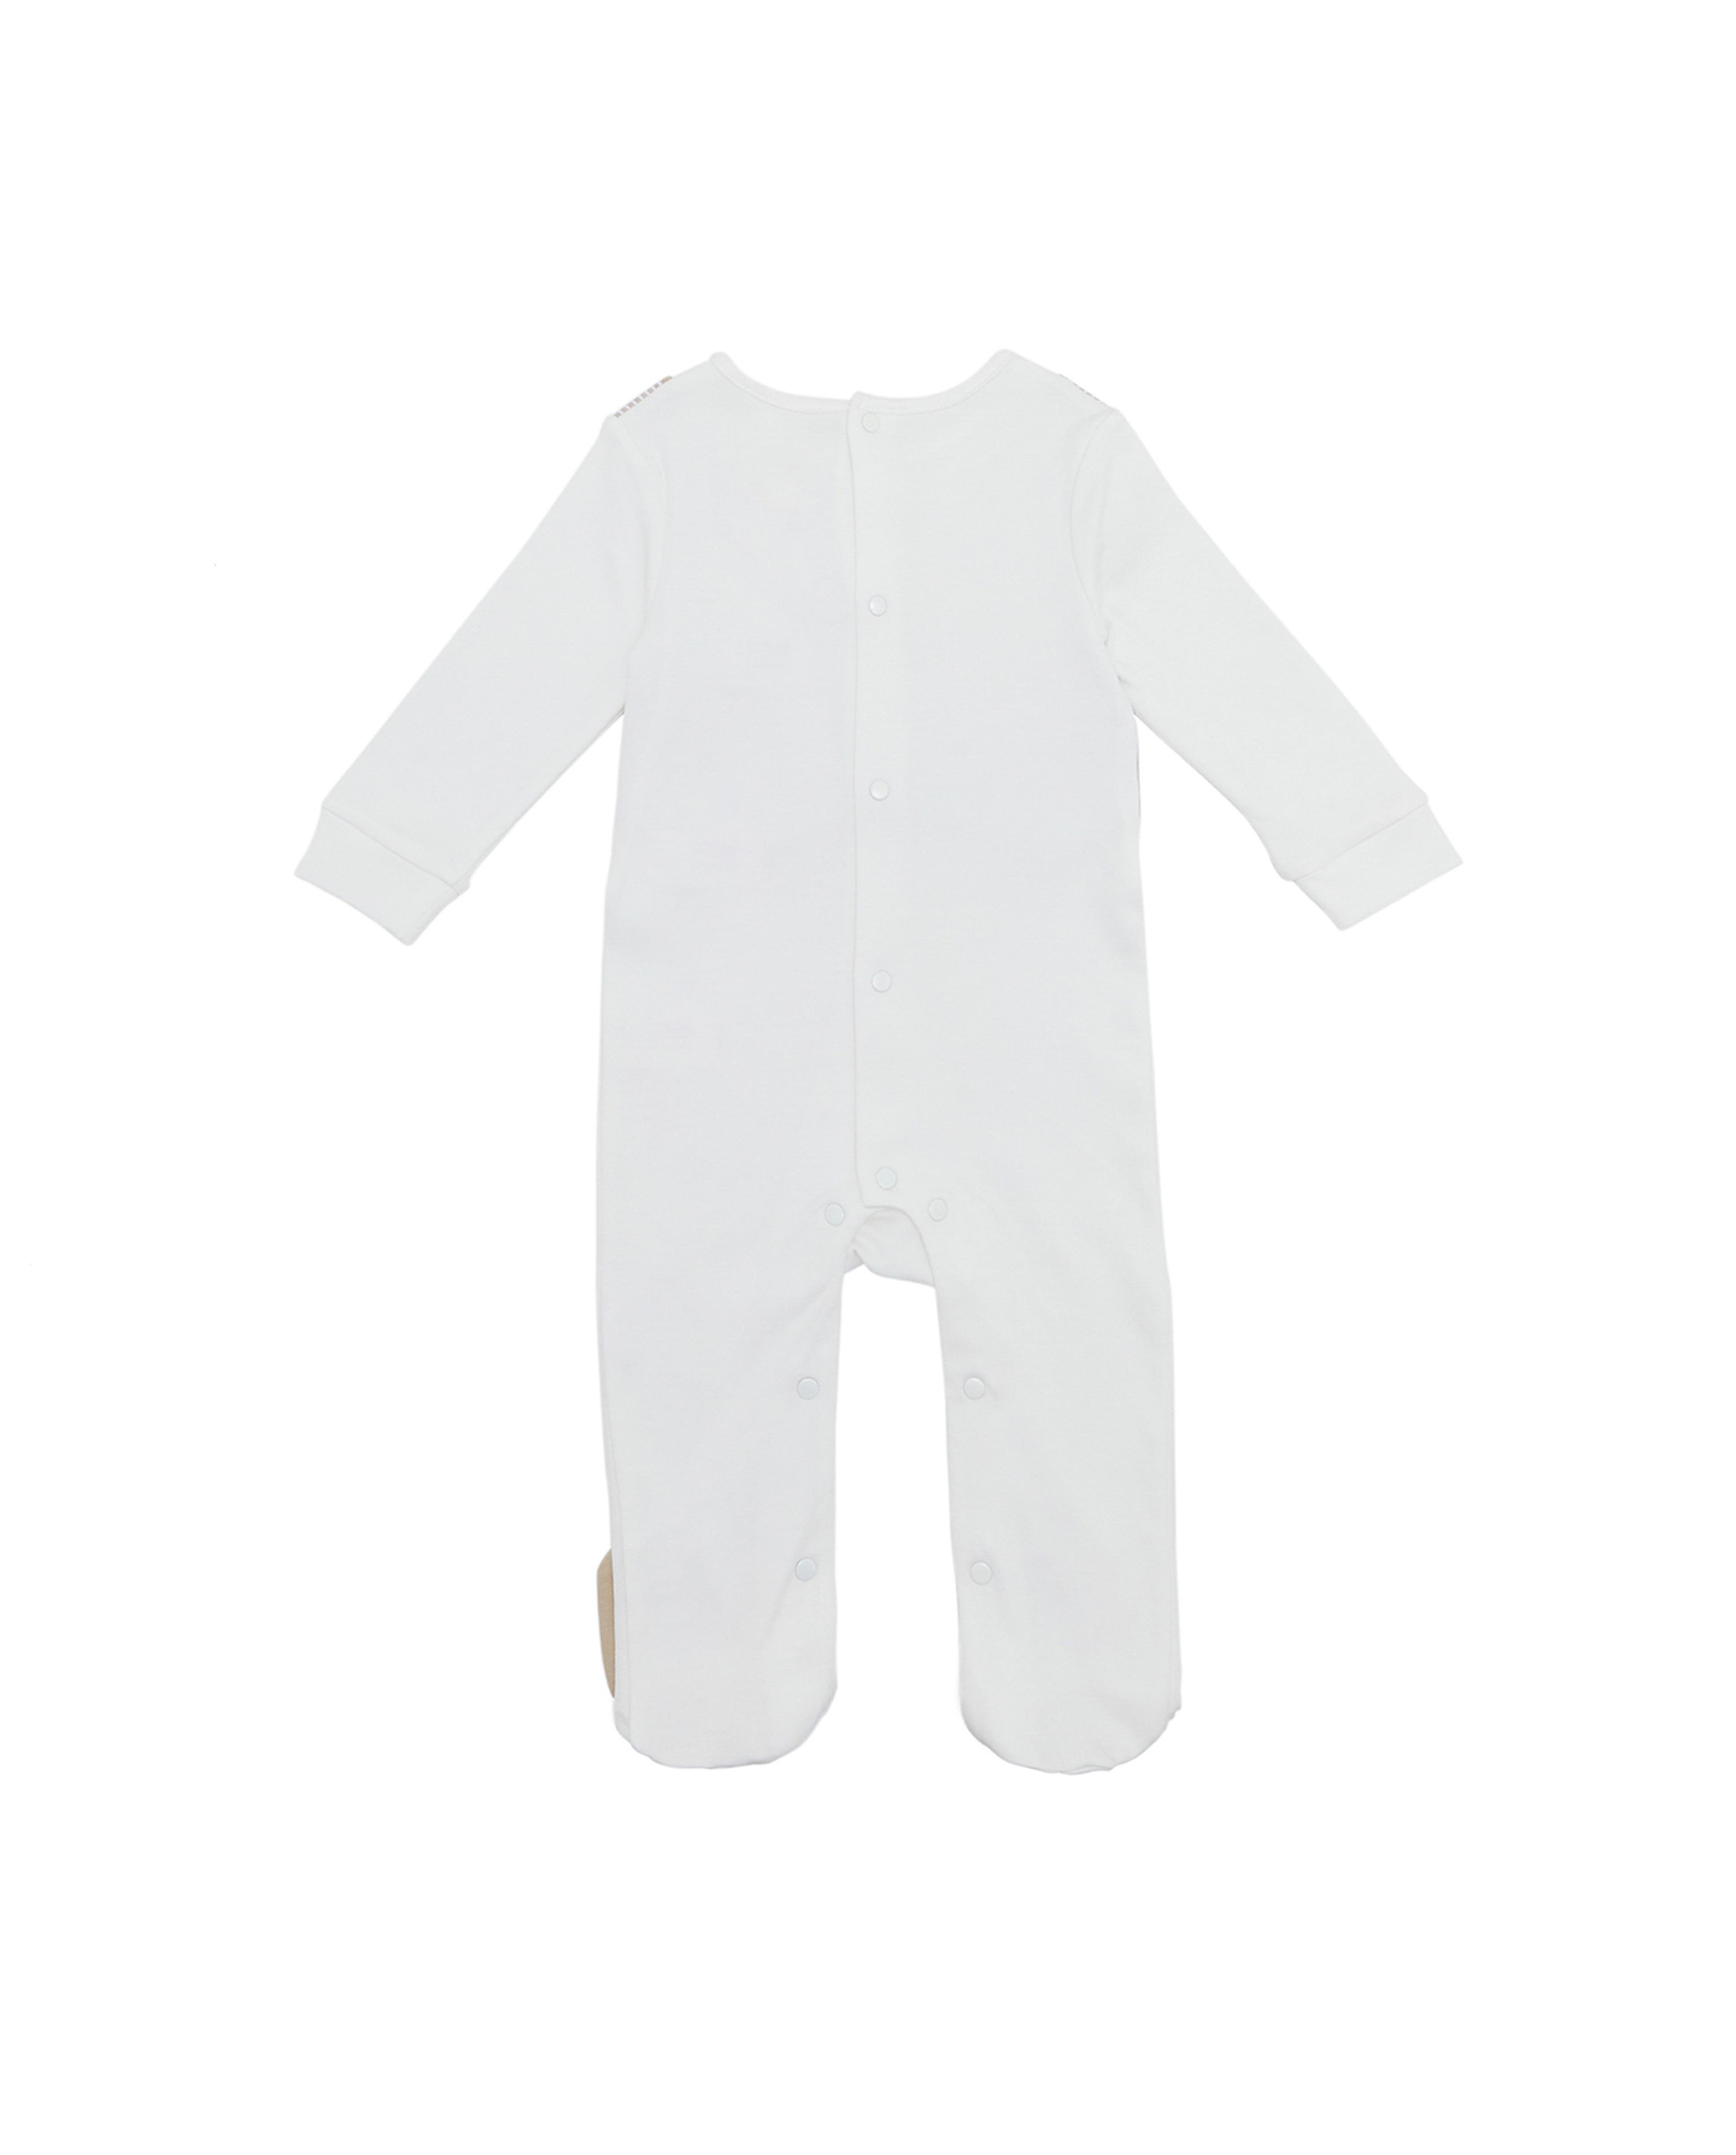 Patterned Footed Sleepsuit with Long Sleeves